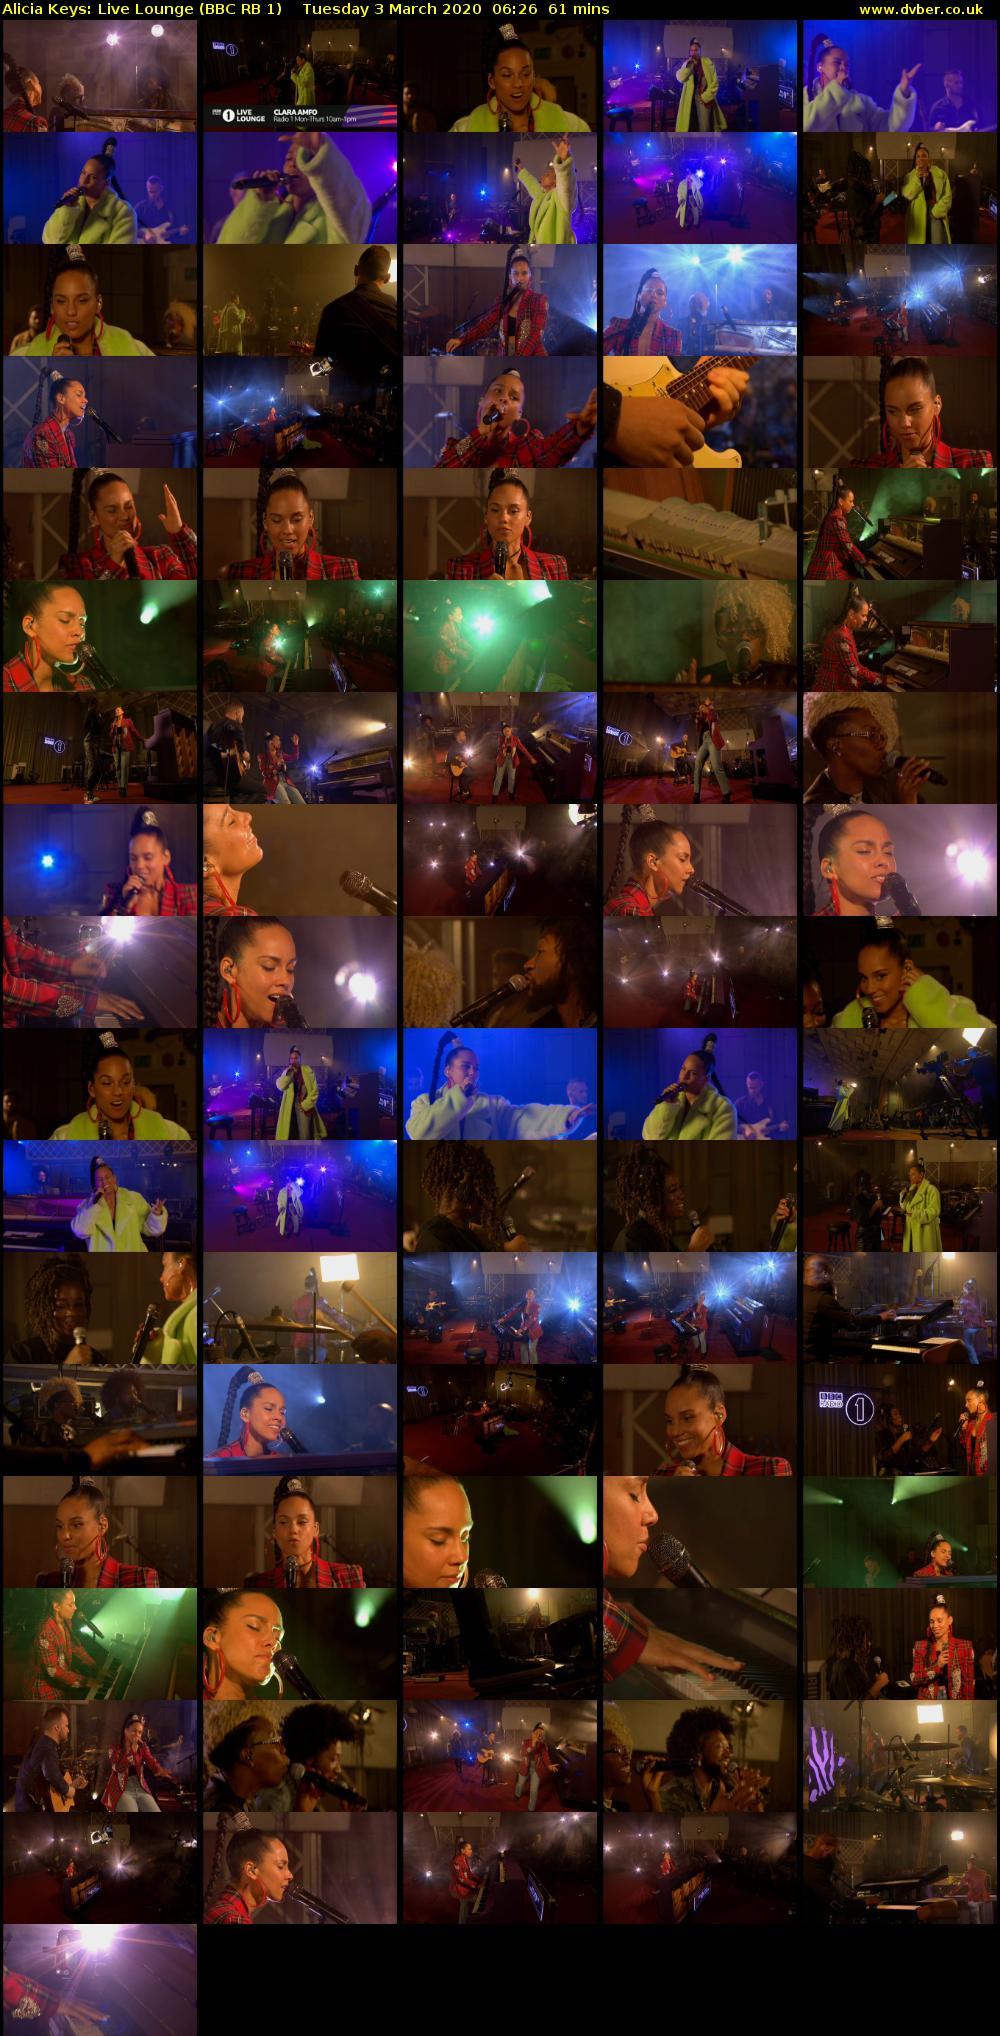 Alicia Keys: Live Lounge (BBC RB 1) Tuesday 3 March 2020 06:26 - 07:27